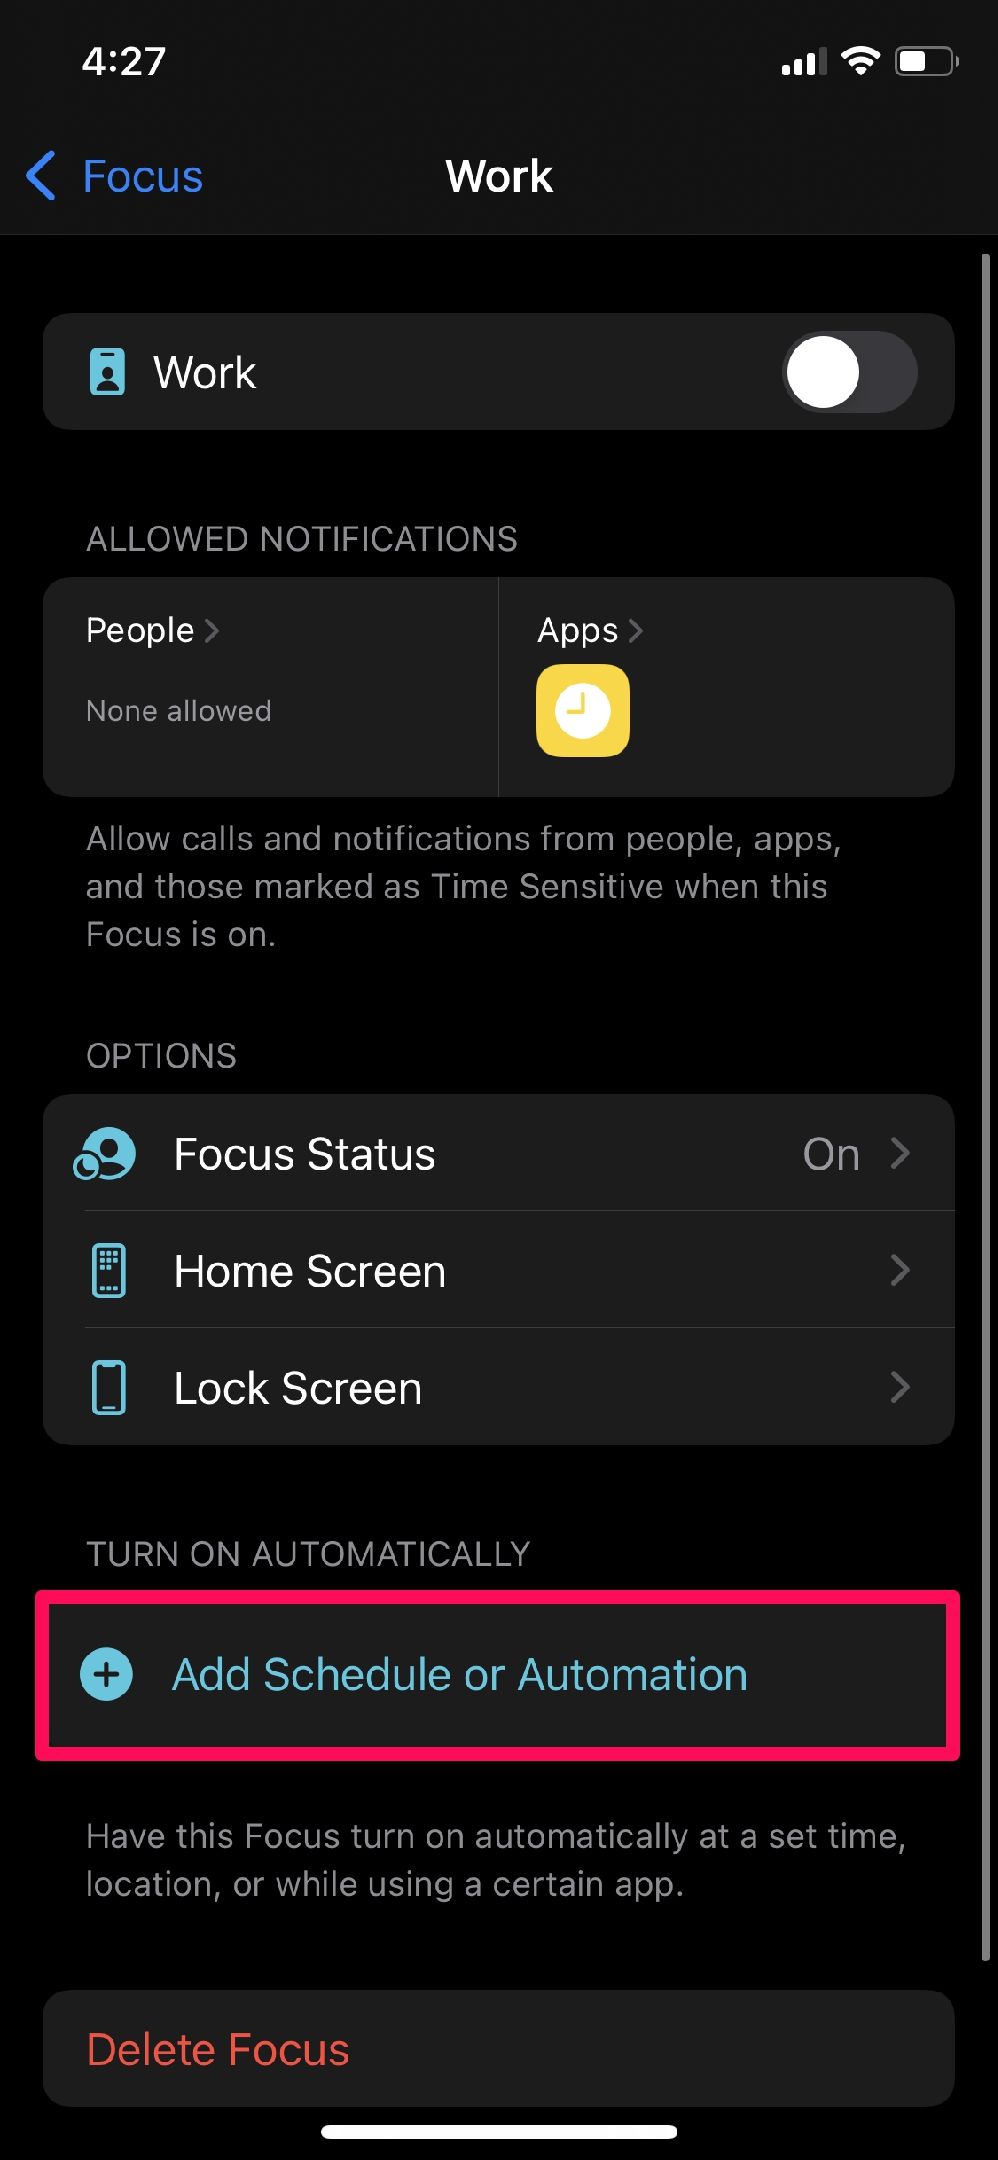 Scheduling and automating Focus mode on iPhone